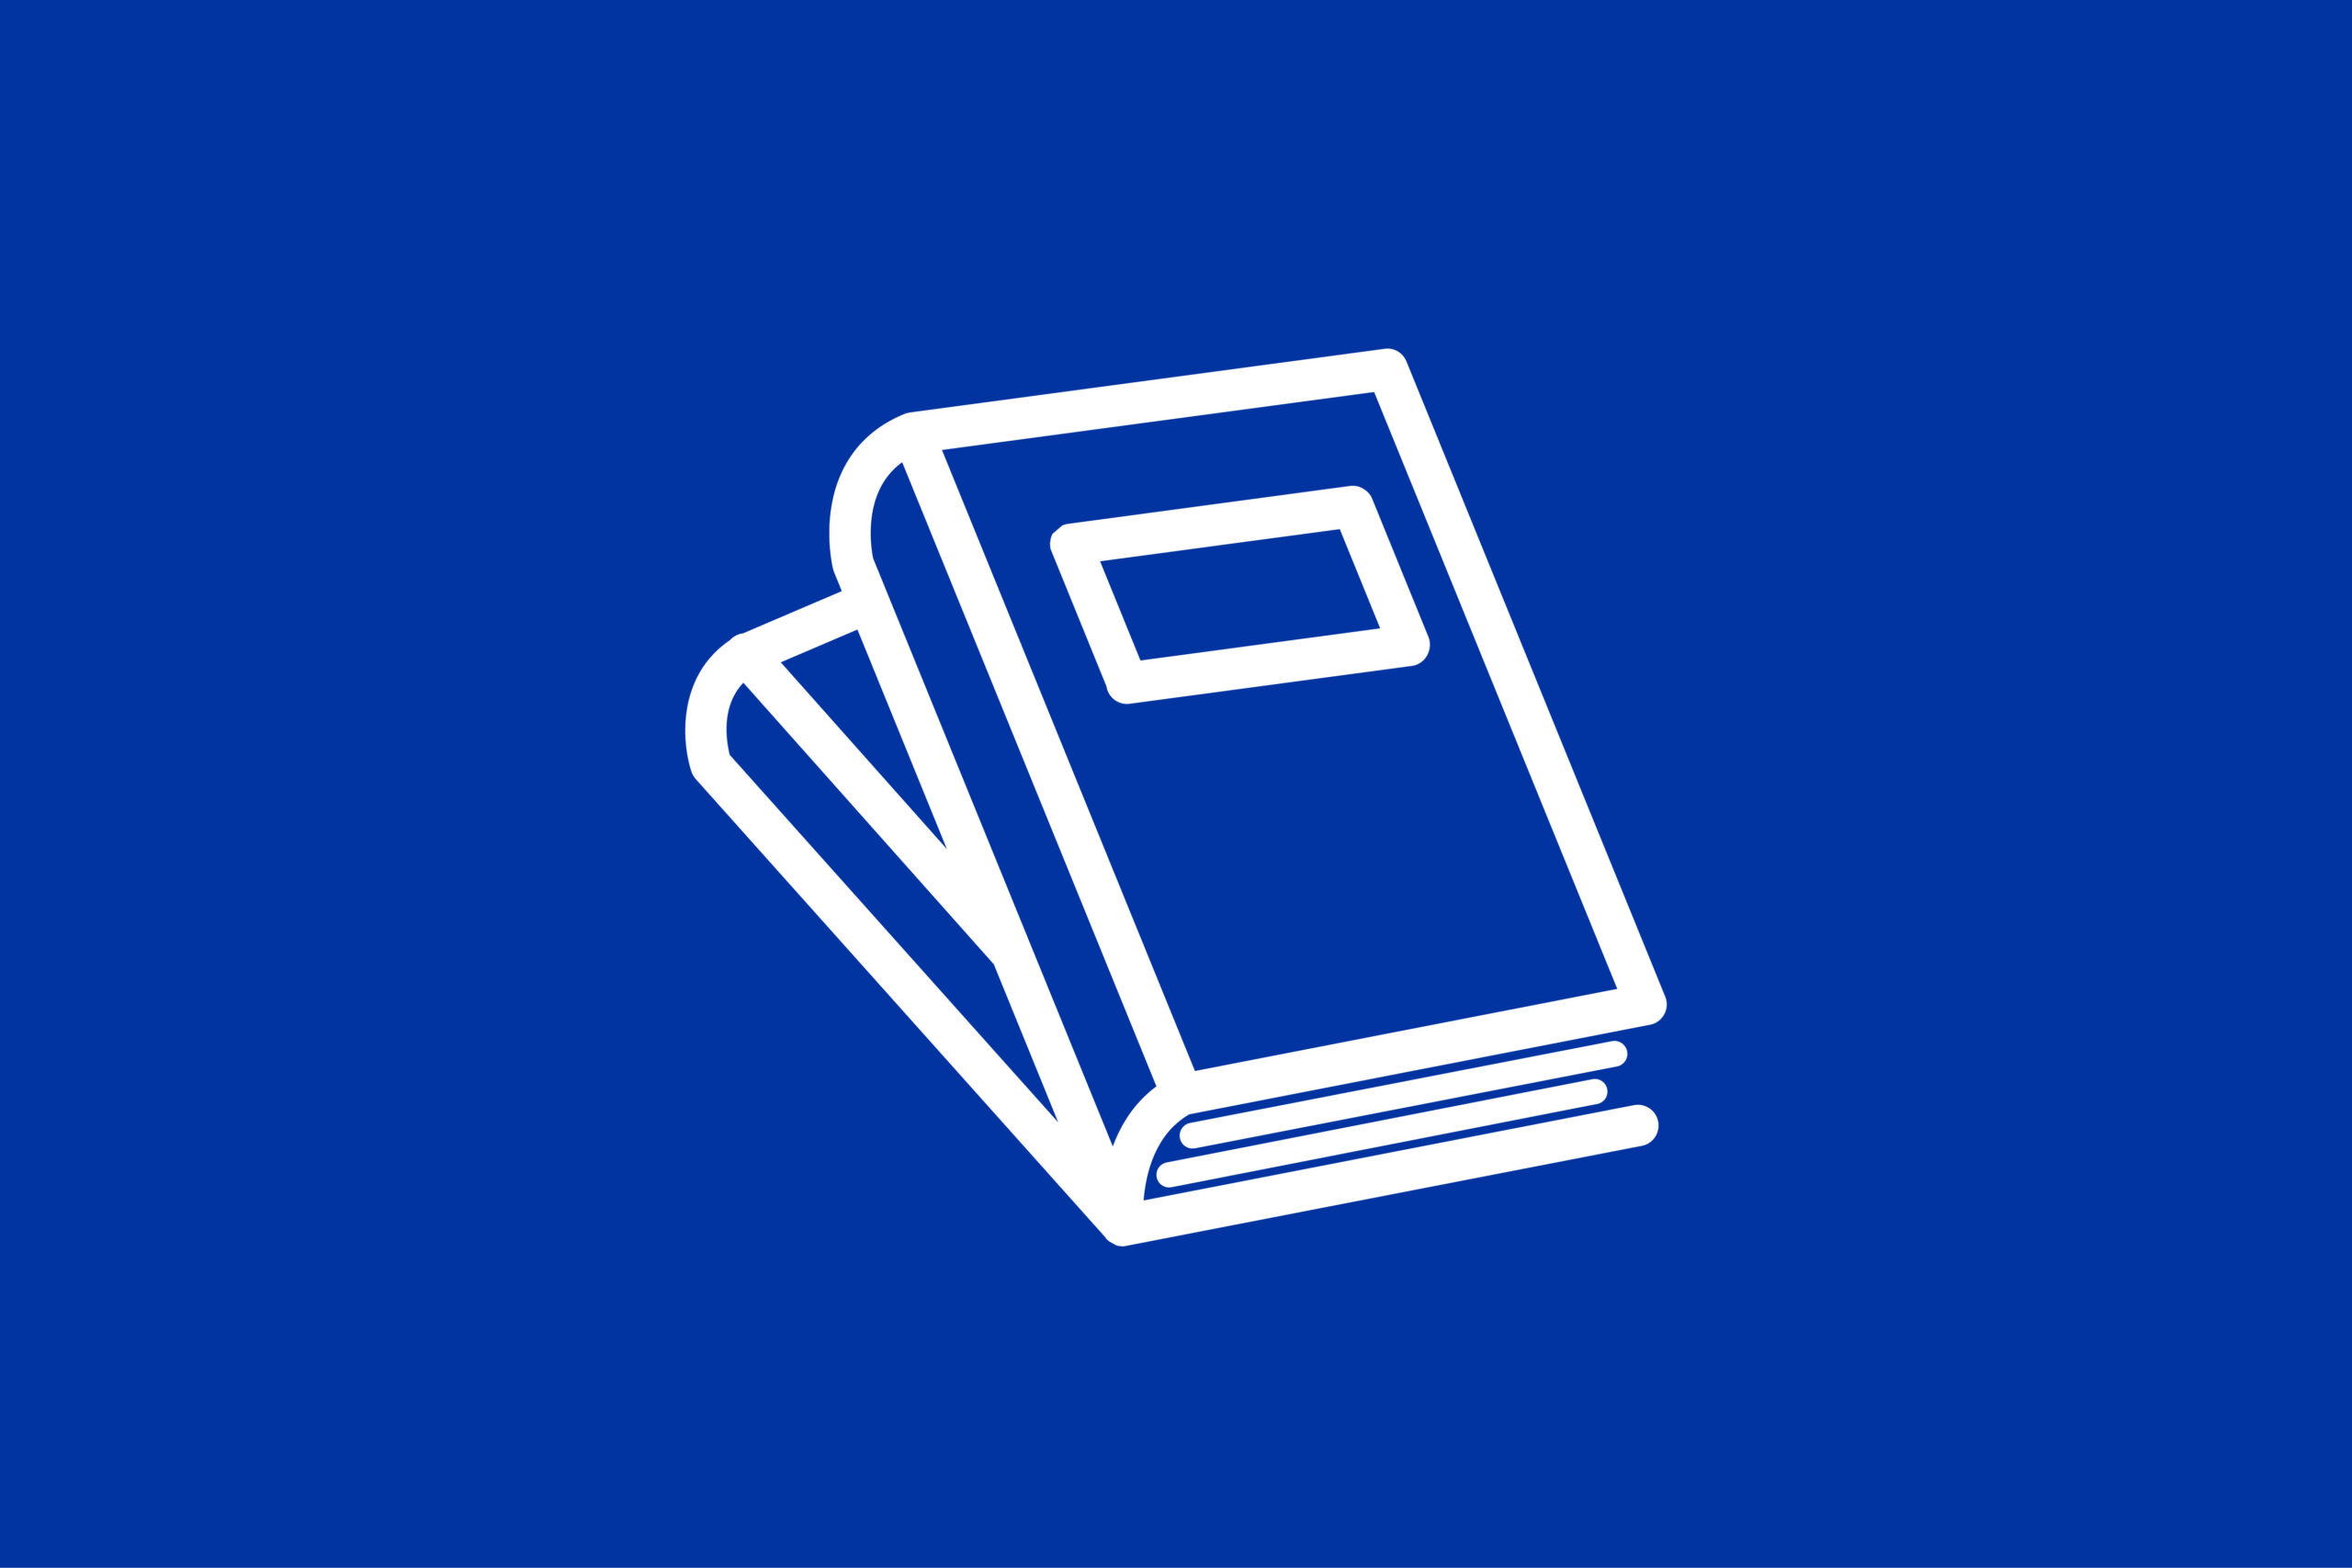 white books icon on a blue background